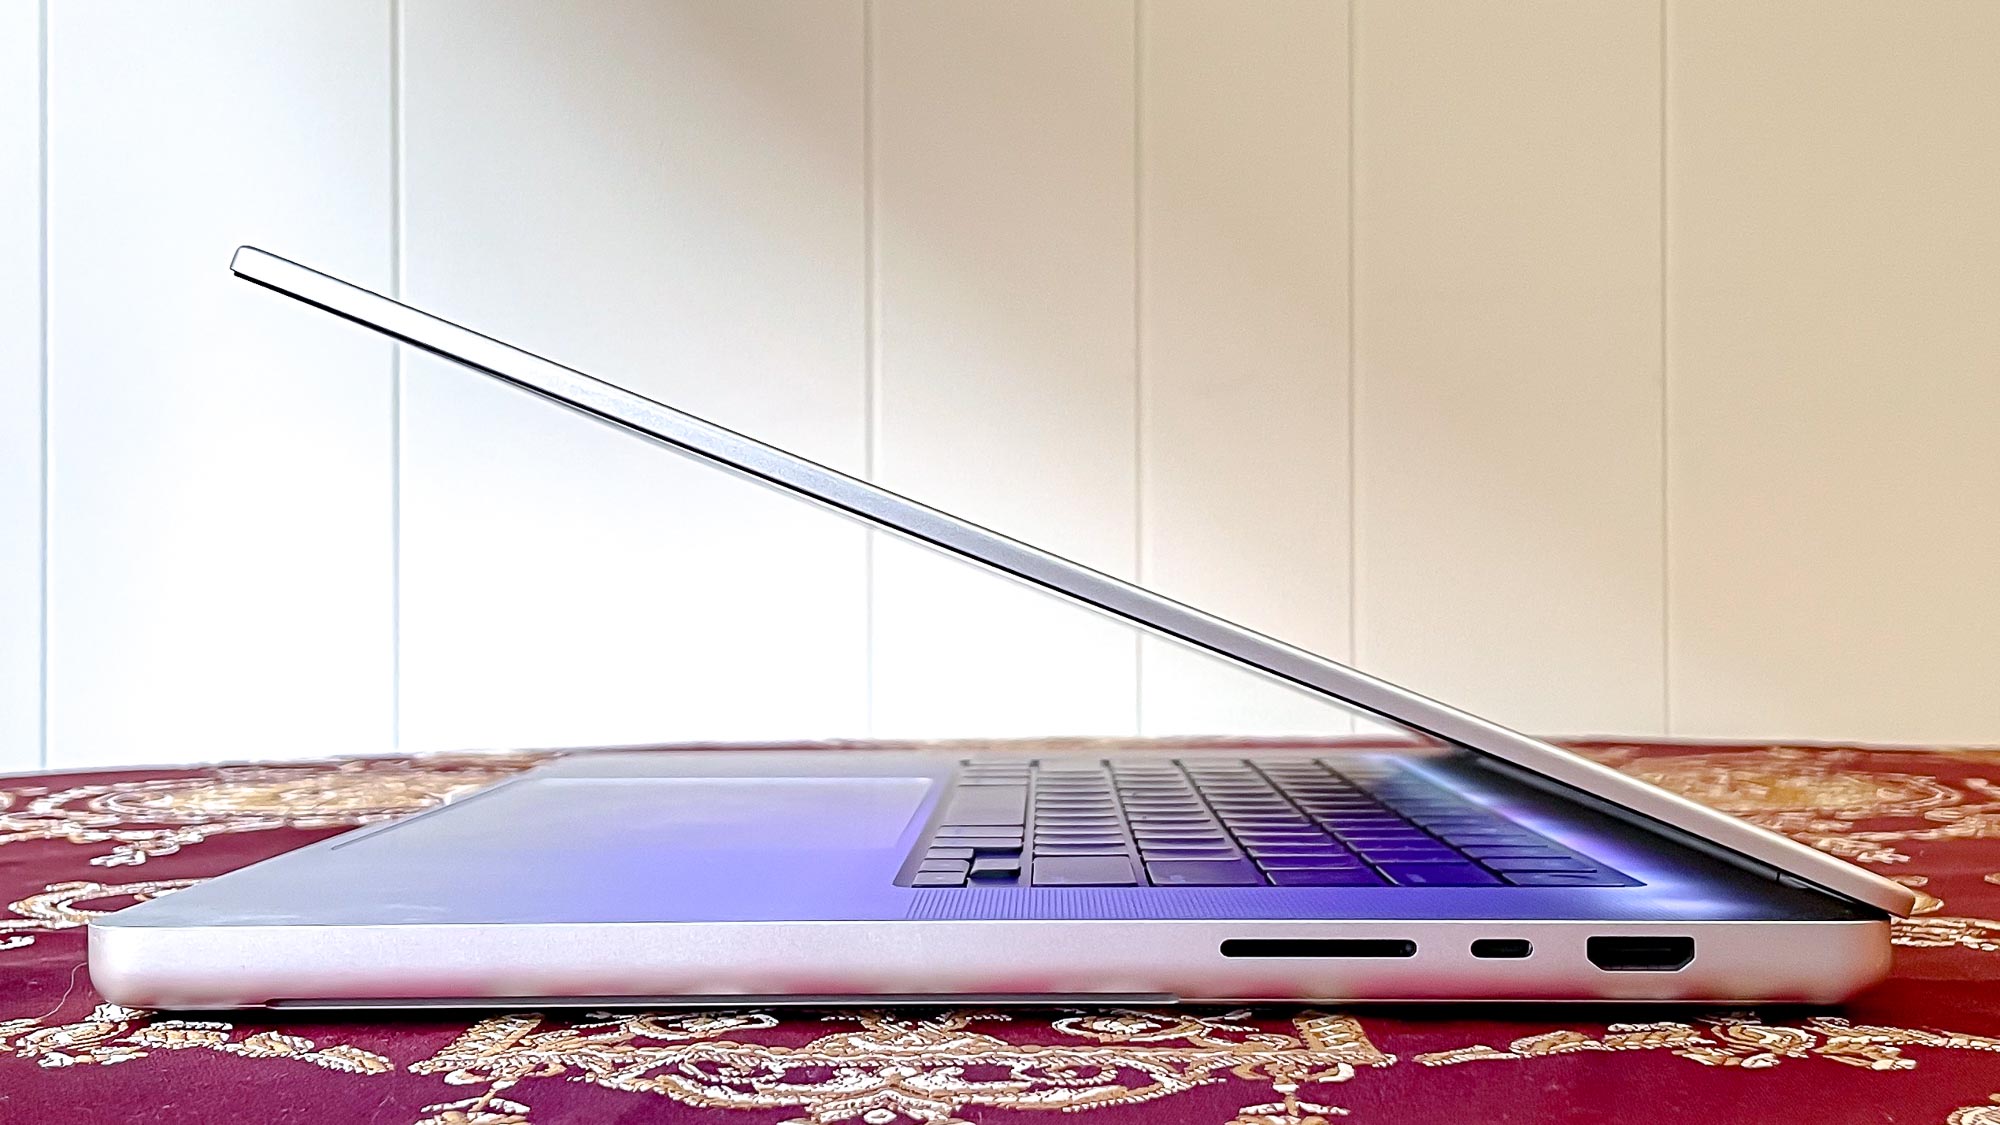 MacBook Pro 2021 (16-inch) on a table, right edge shown